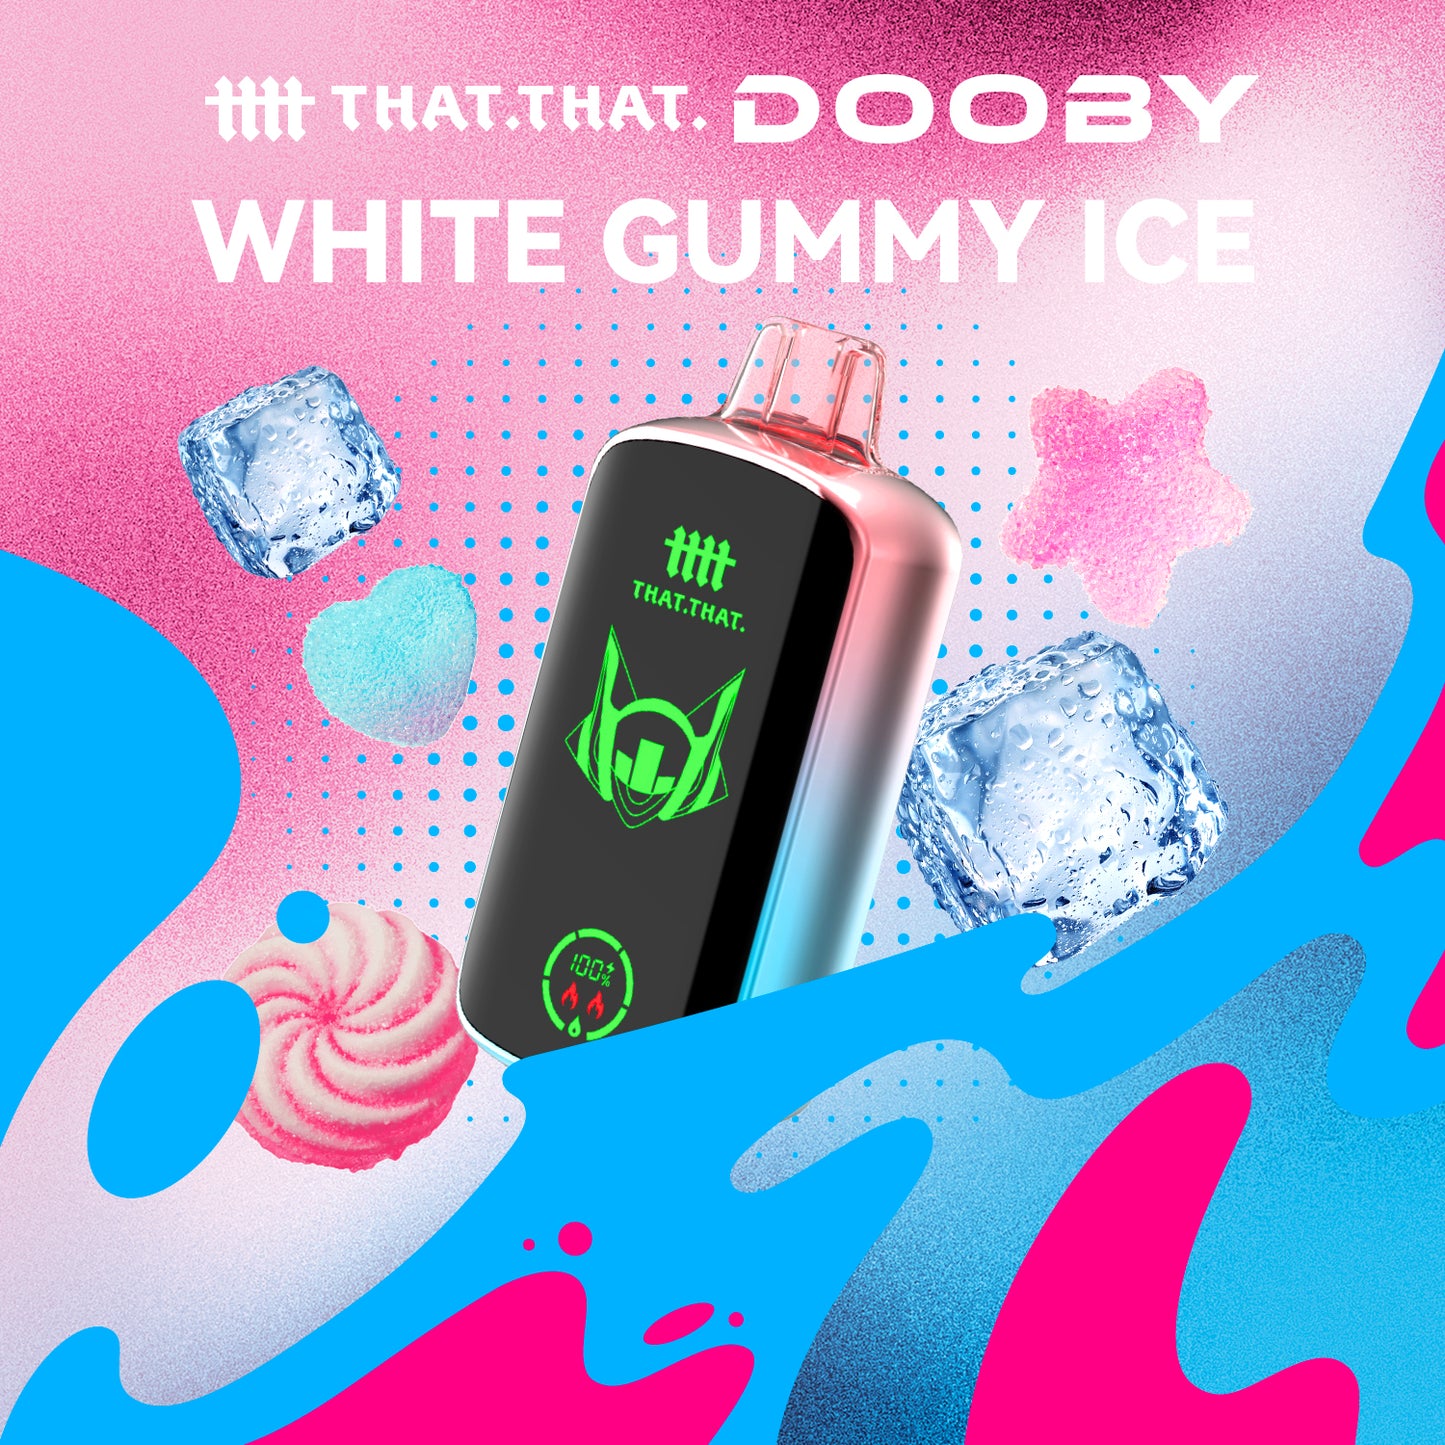 White Gummy Ice THATTHAT Dooby 18000 Disposable